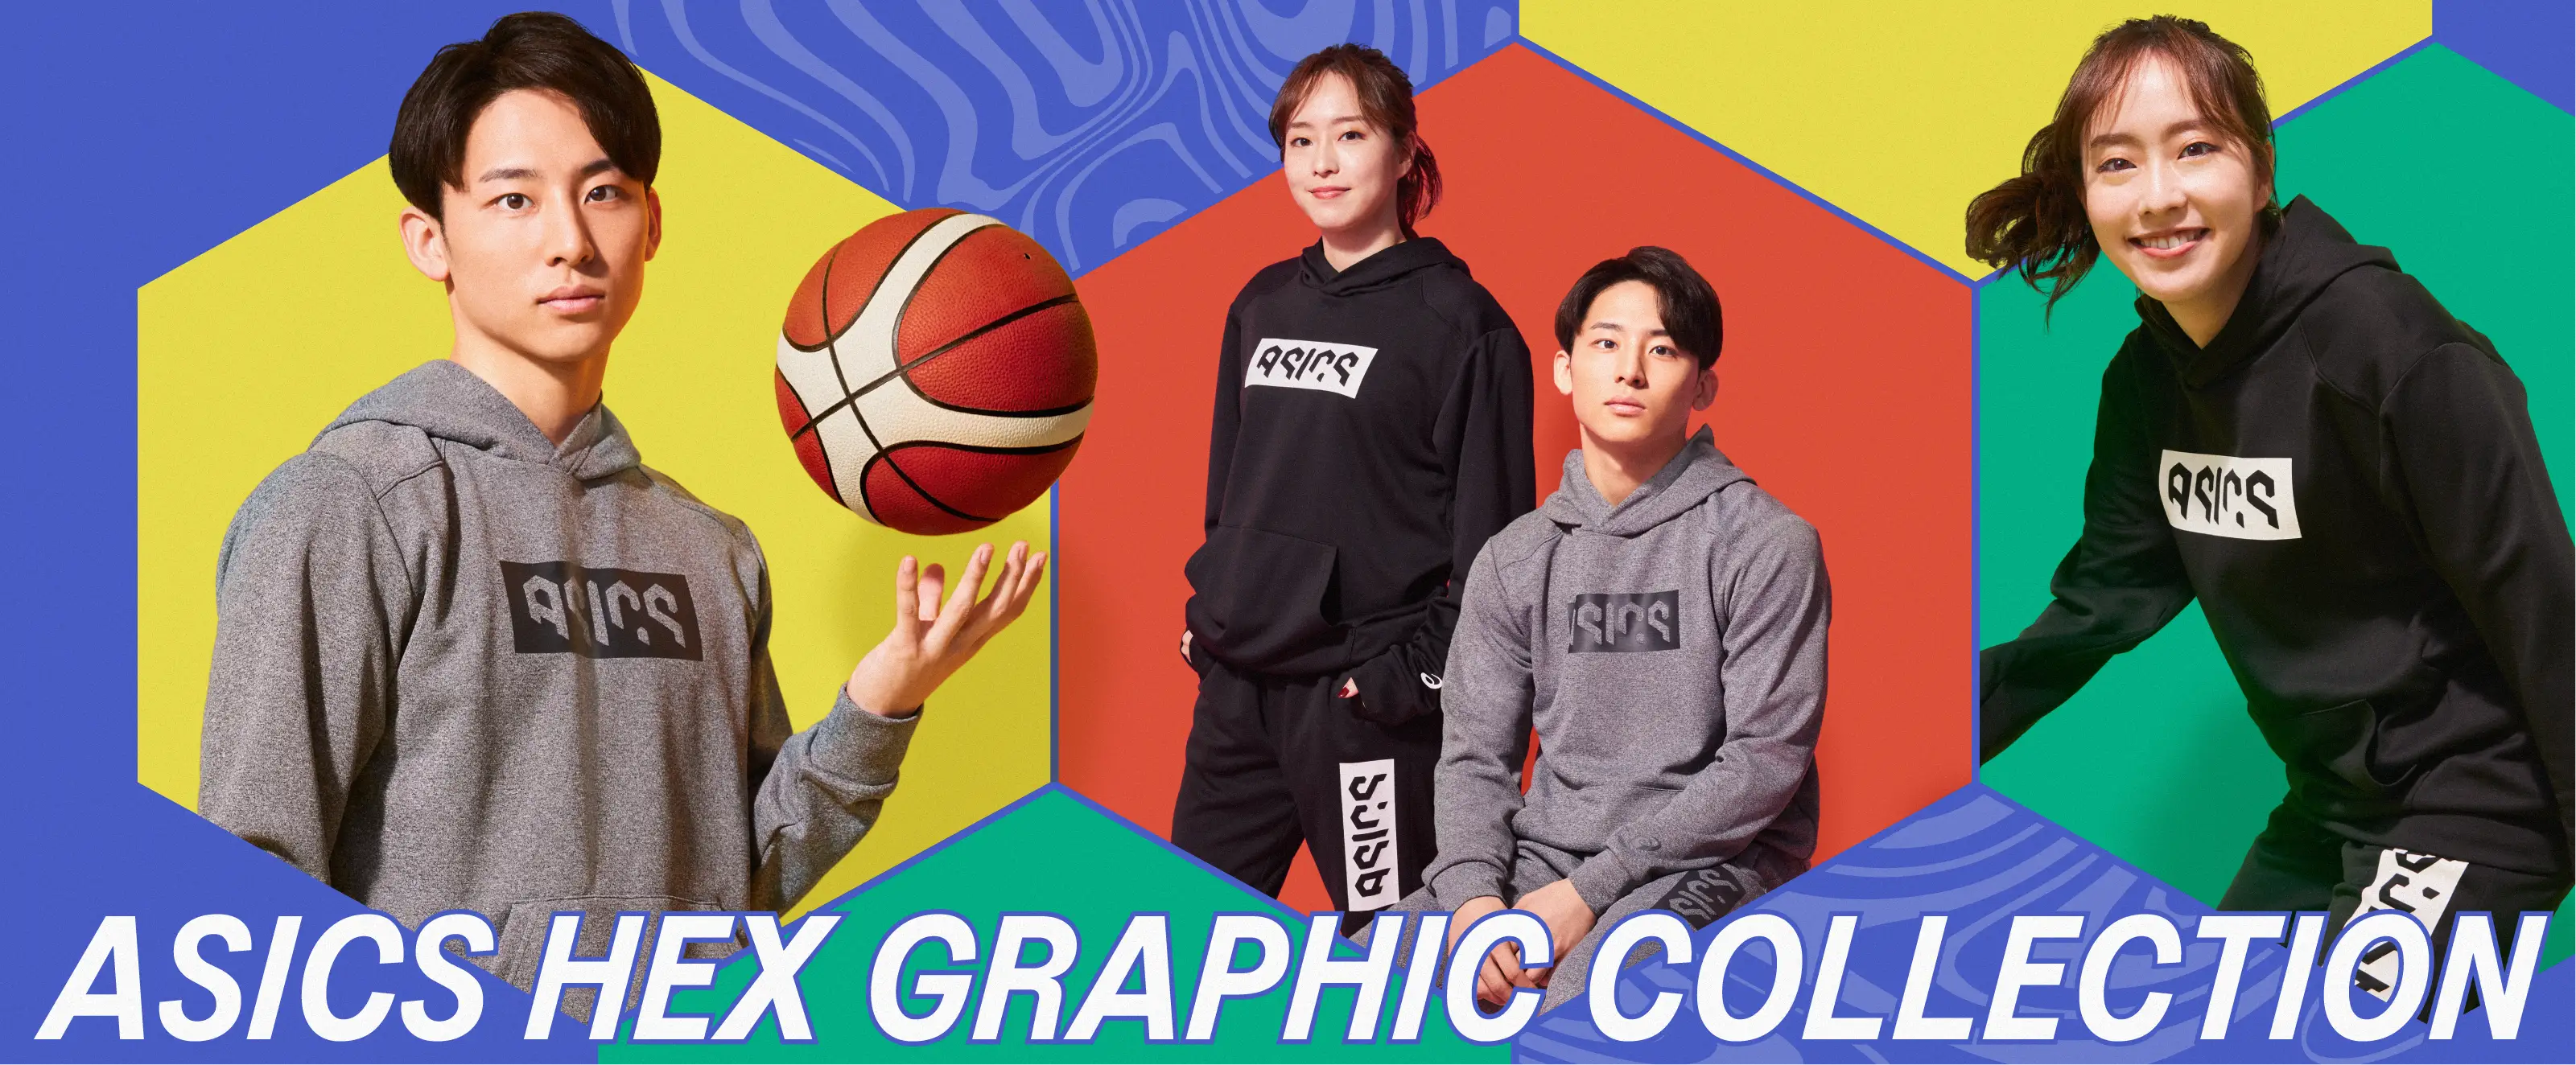 ASICS HEX GRAPHIC COLLECTION HERO BANNER PC